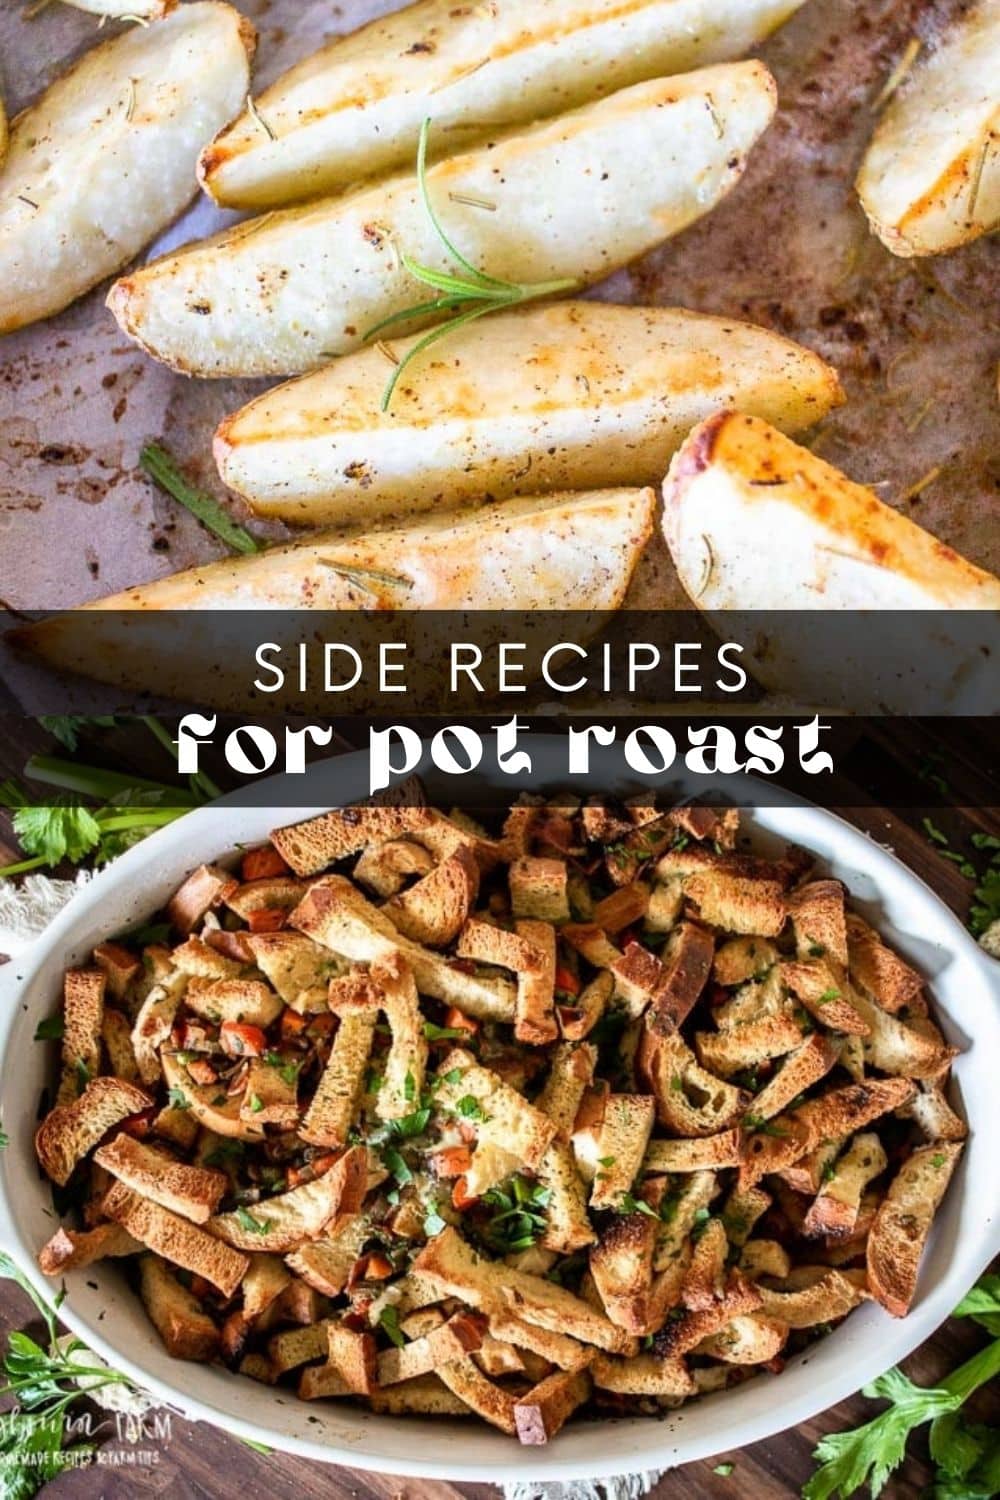 Are you wondering what to serve with pot roast? You want a side dish that will complement the texture and flavor of the pot roast but also add something new. These side options will do just that!